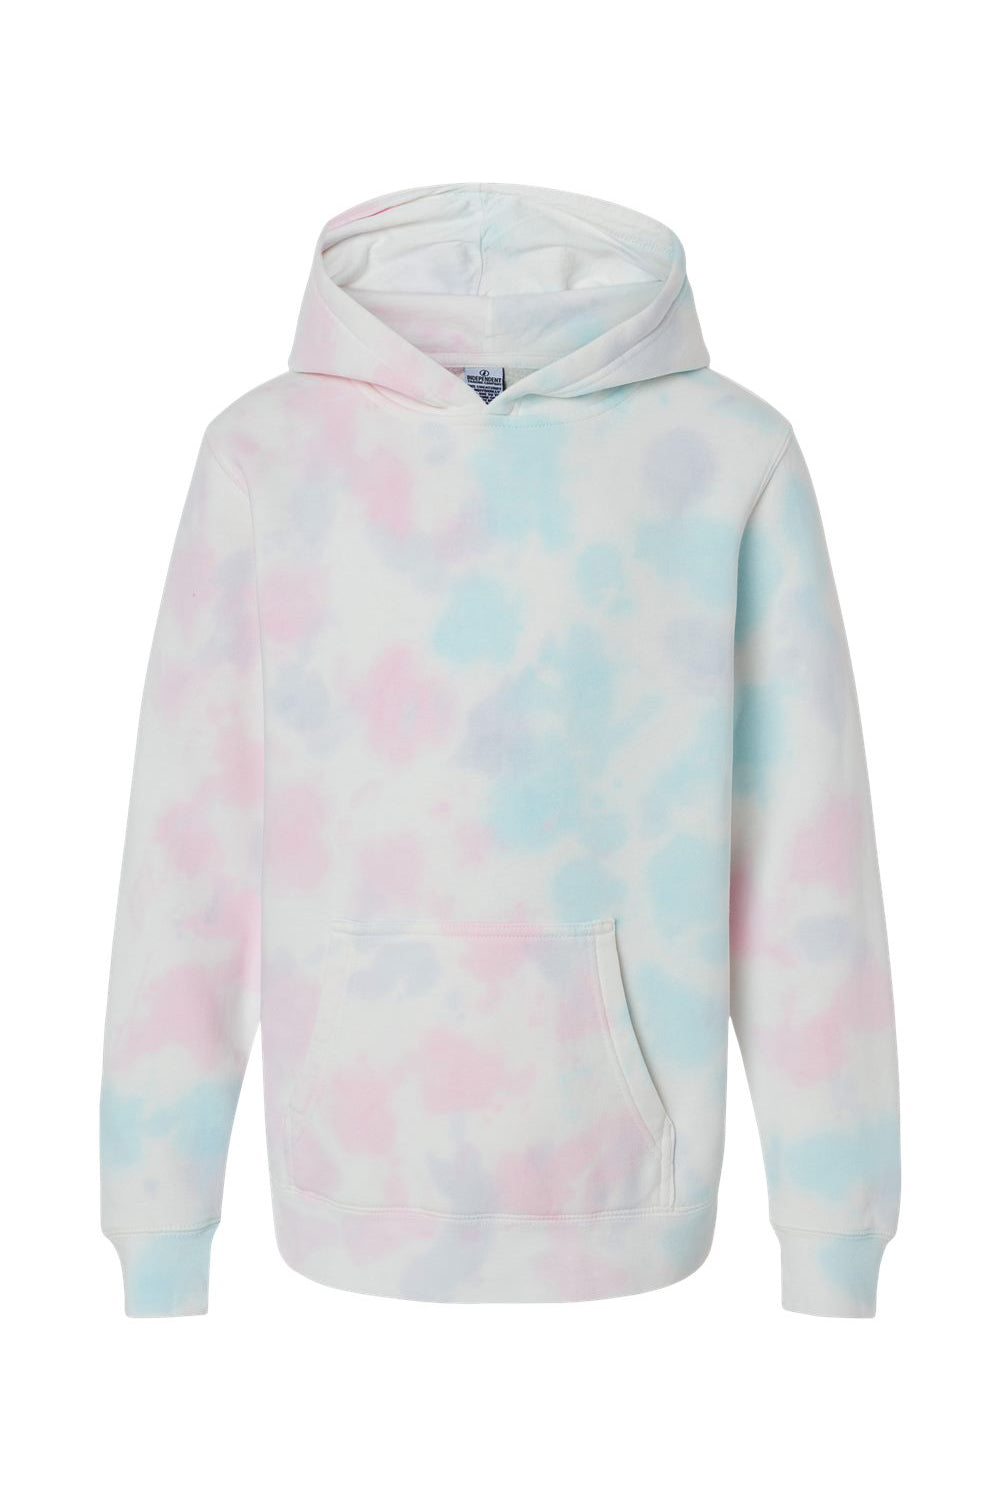 Independent Trading Co. PRM1500TD Youth Tie-Dye Hooded Sweatshirt Hoodie Cotton Candy Flat Front